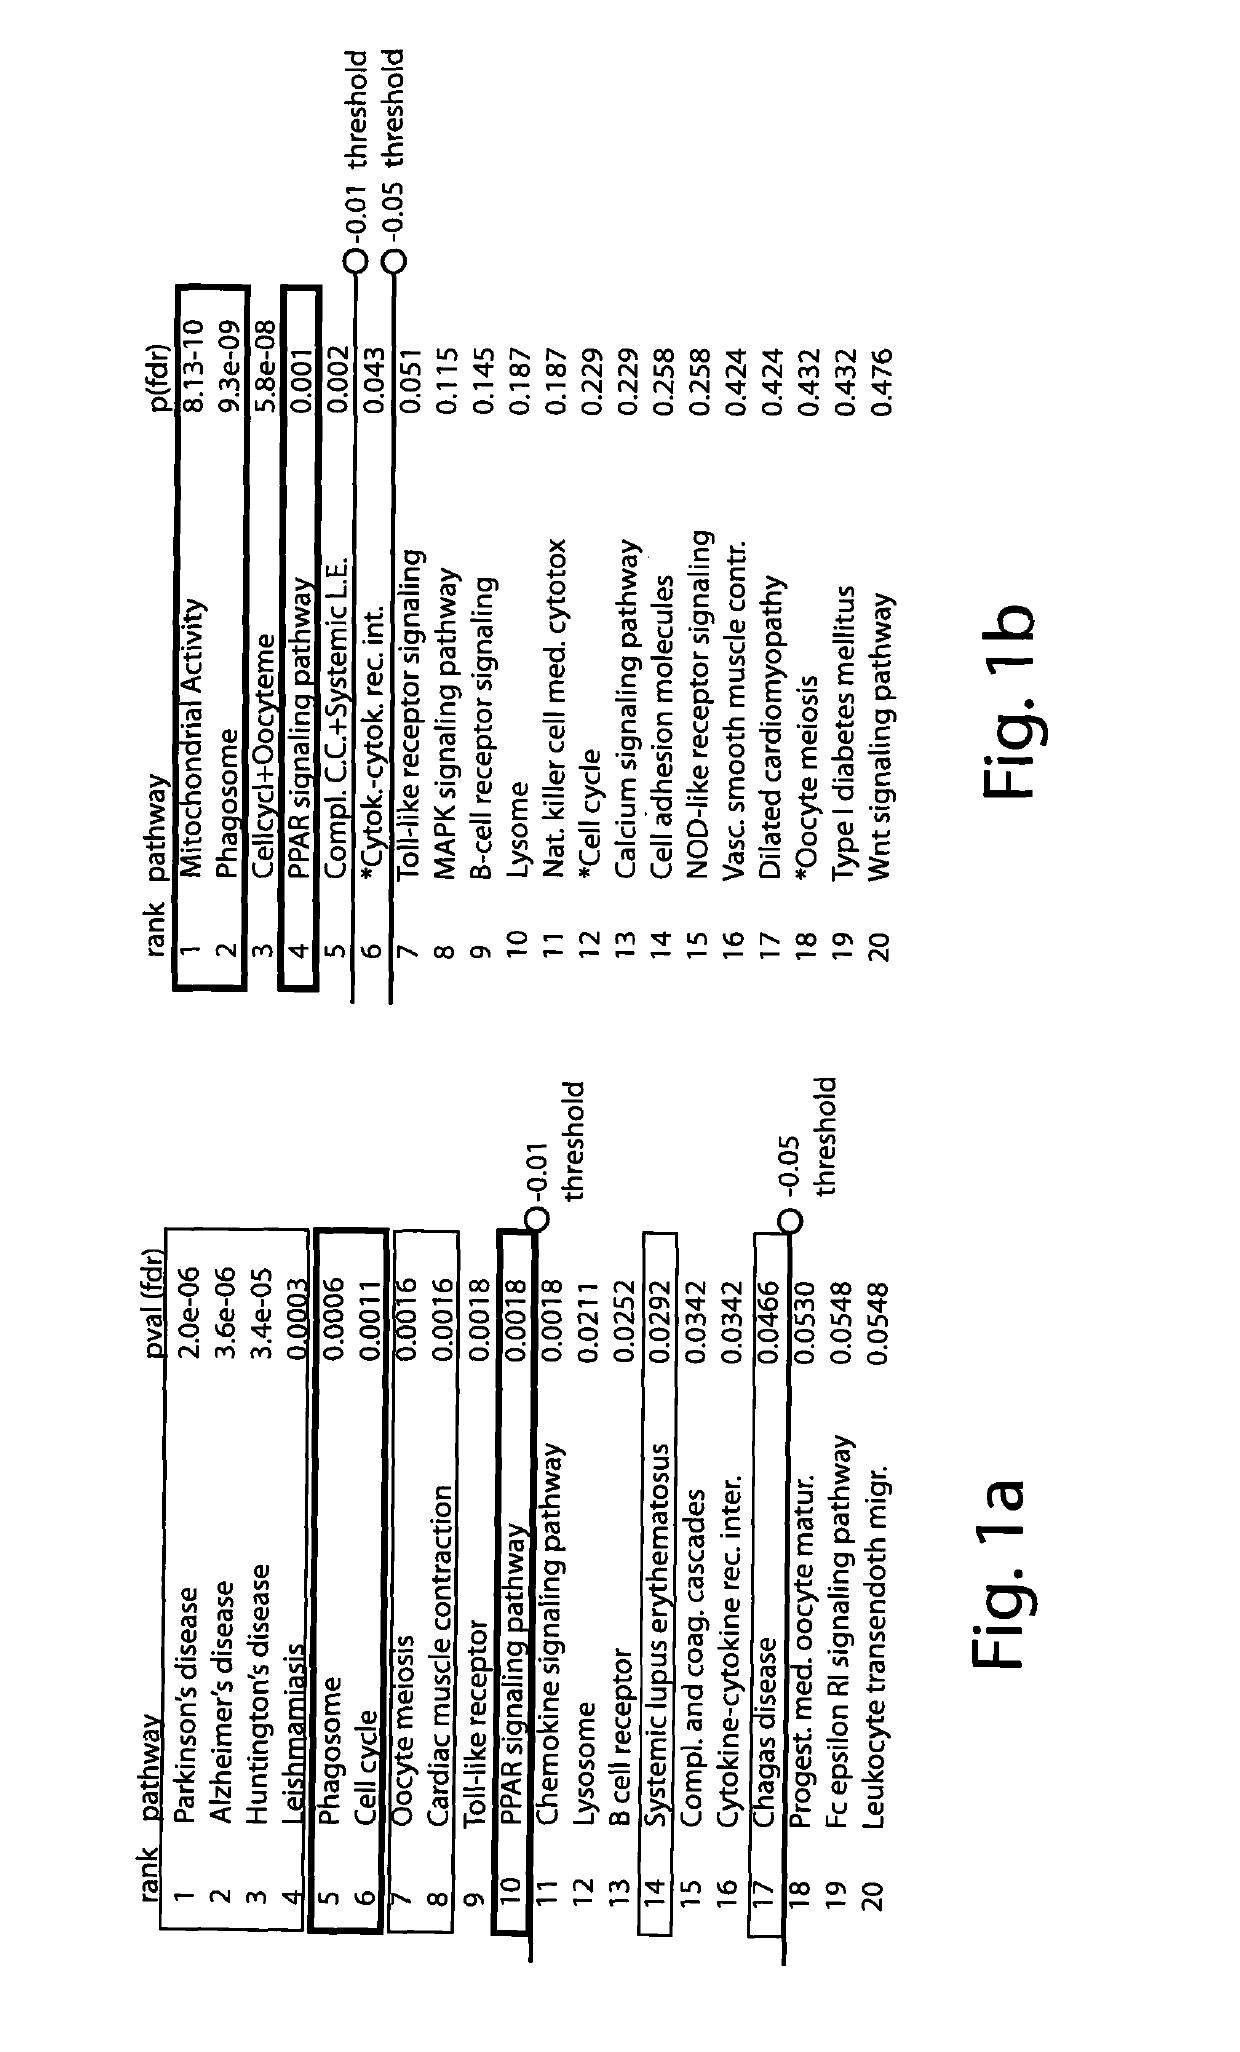 Genetic, metabolic and biochemical pathway analysis system and methods